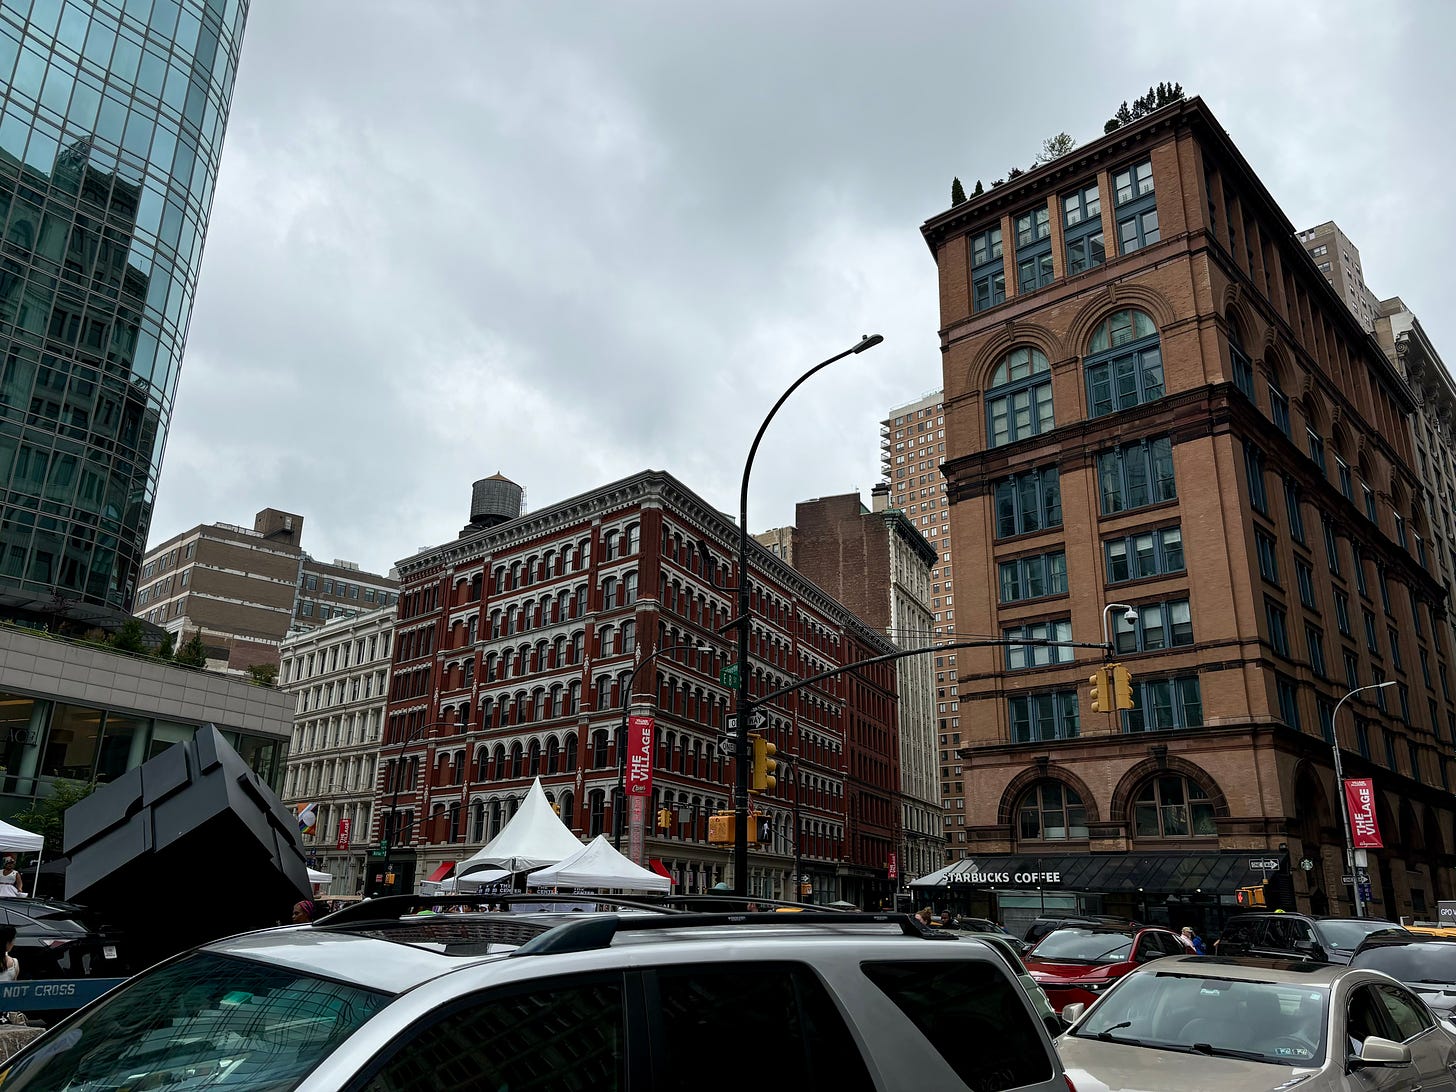 A large brown building with ornate windows and a Starbucks on the ground floor. It is across the street from a red building with a roof tank and to the left of the frame is the Astor Place cube.